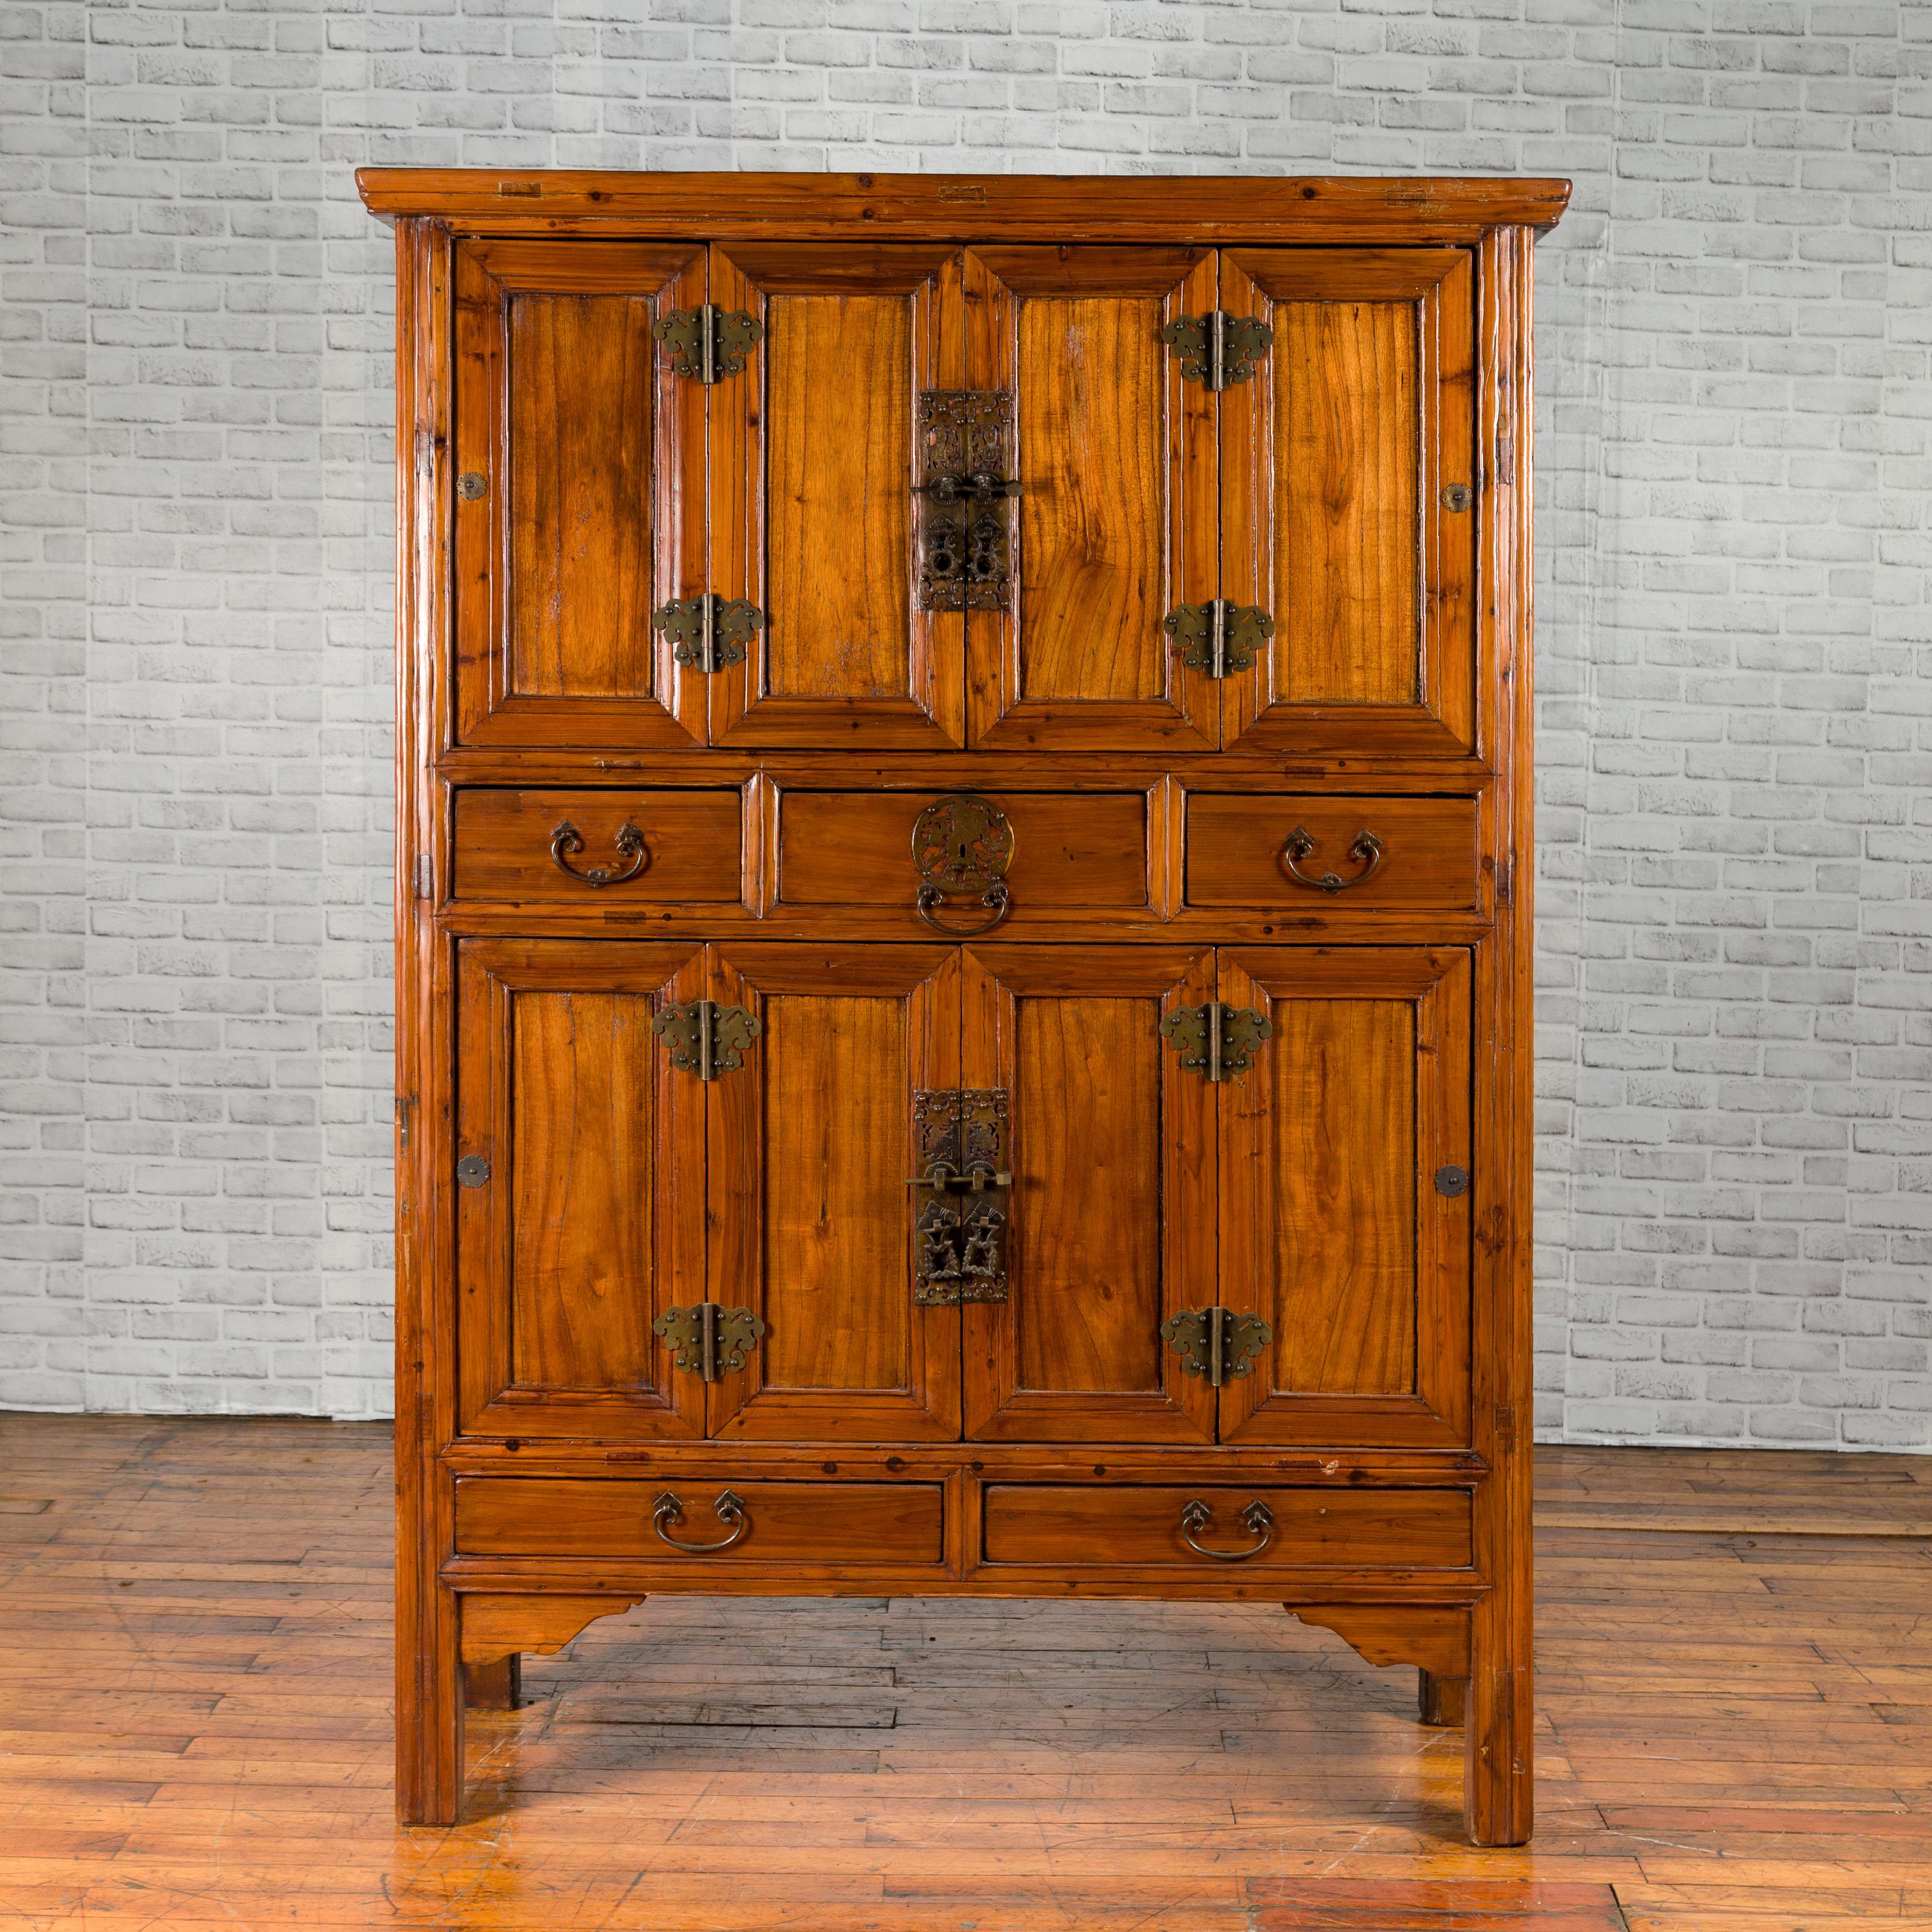 A Chinese Qing Dynasty period accordion doors cabinet from the 19th century, with five drawers. Created in China during the Qing Dynasty, this wooden cabinet features two pairs of accordion doors arranged on two levels and opening to reveal inner